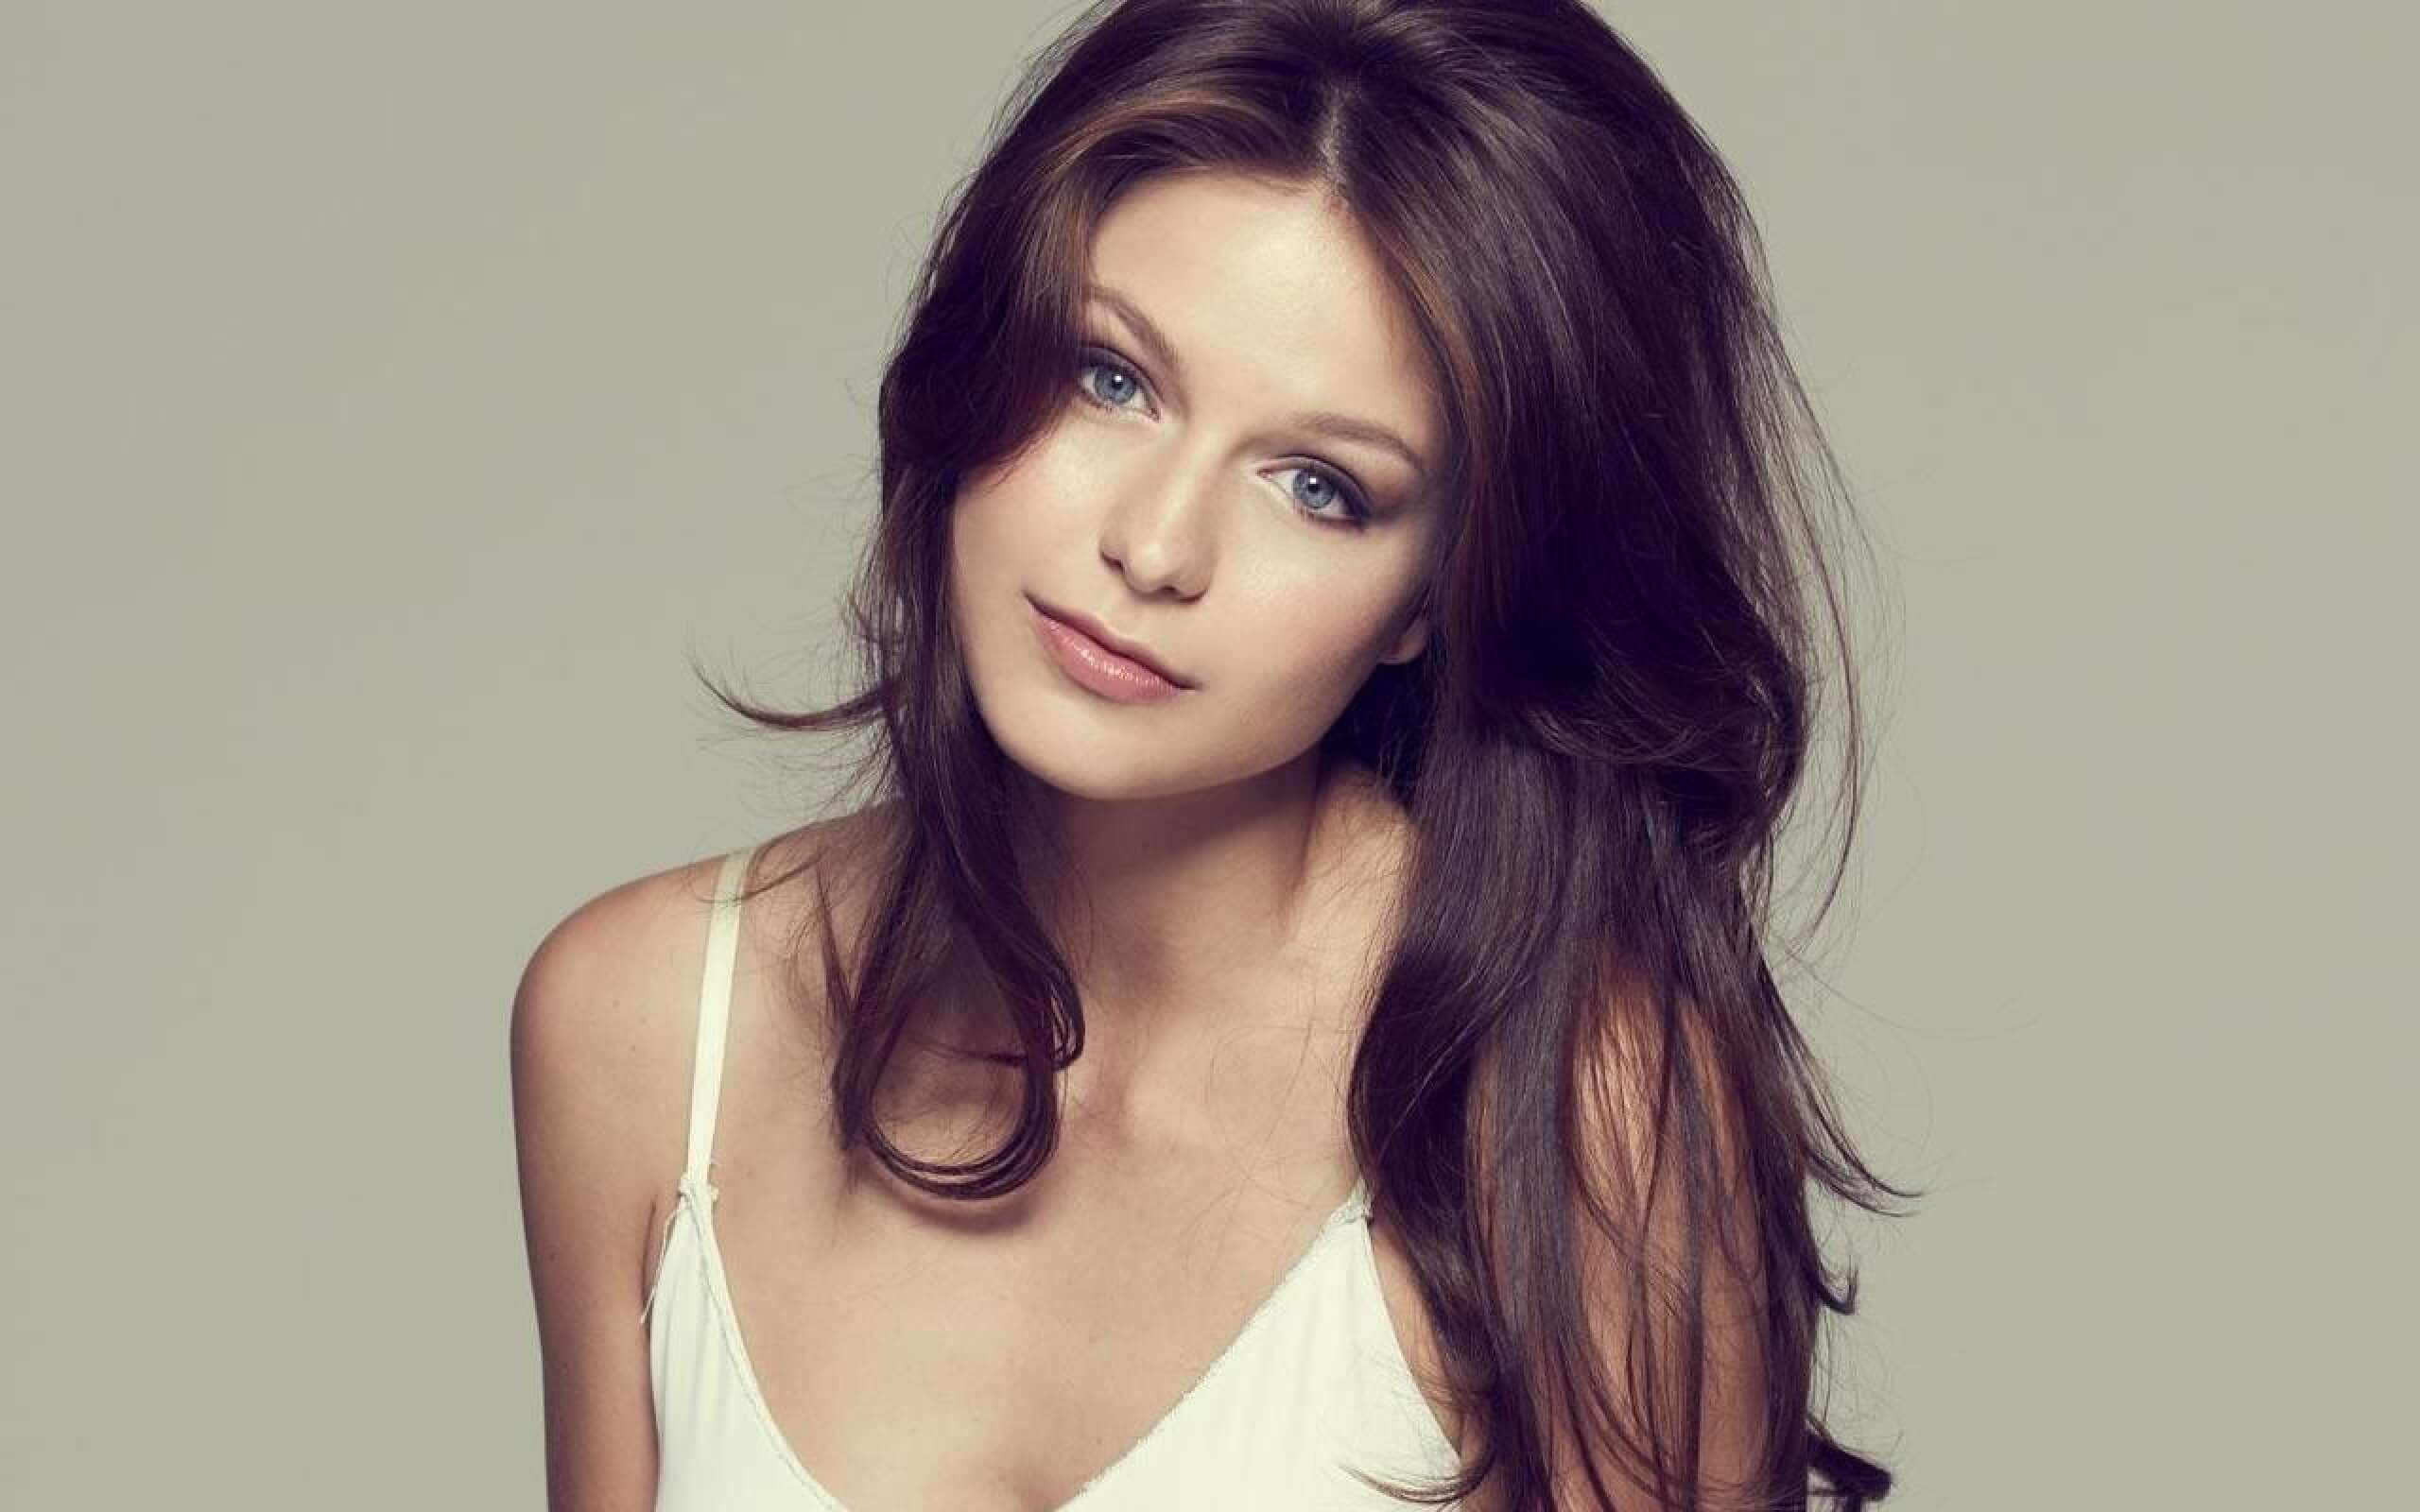 61 Sexy Melissa Benoist Boobs Pictures Will Rock The Fan Inside You | Best Of Comic Books